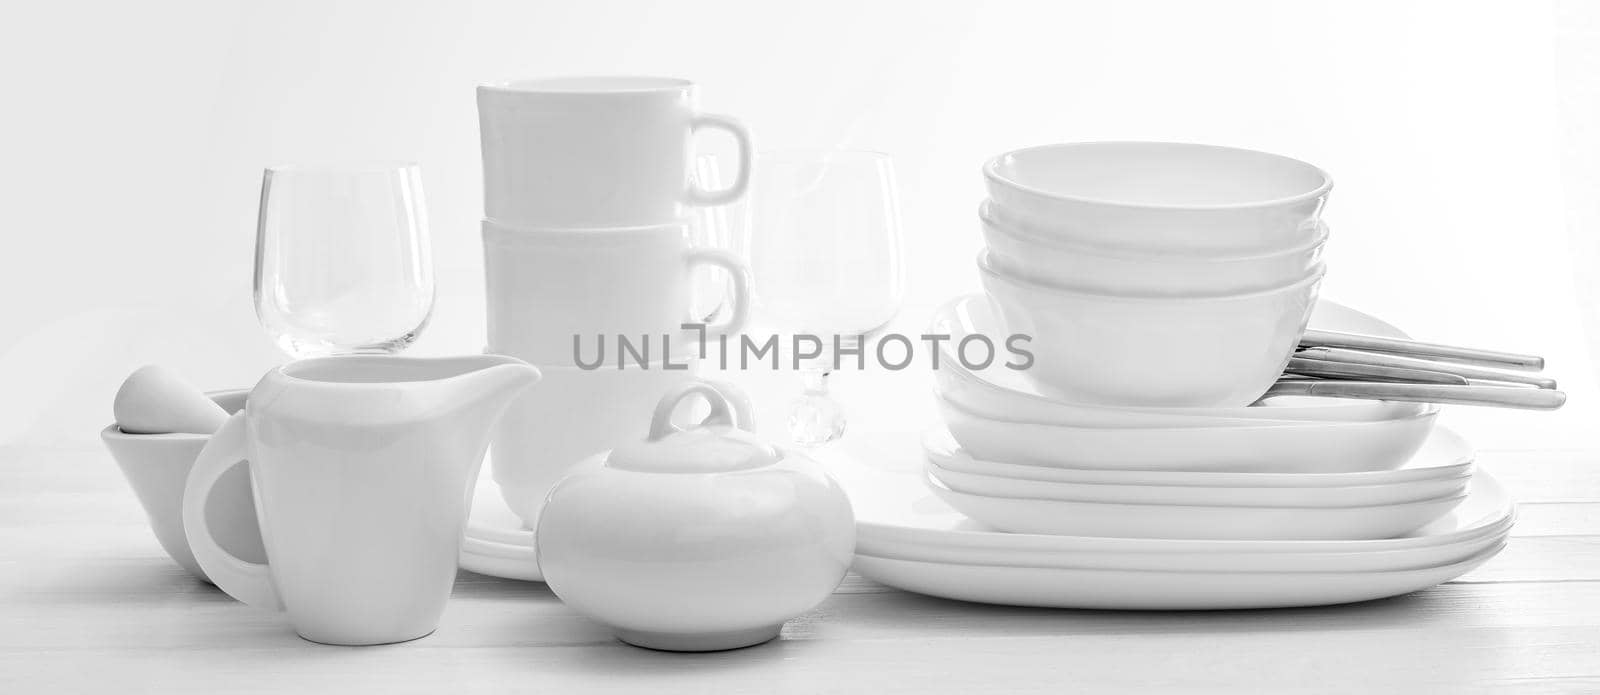 Set of plates and cutleries on light background by tan4ikk1